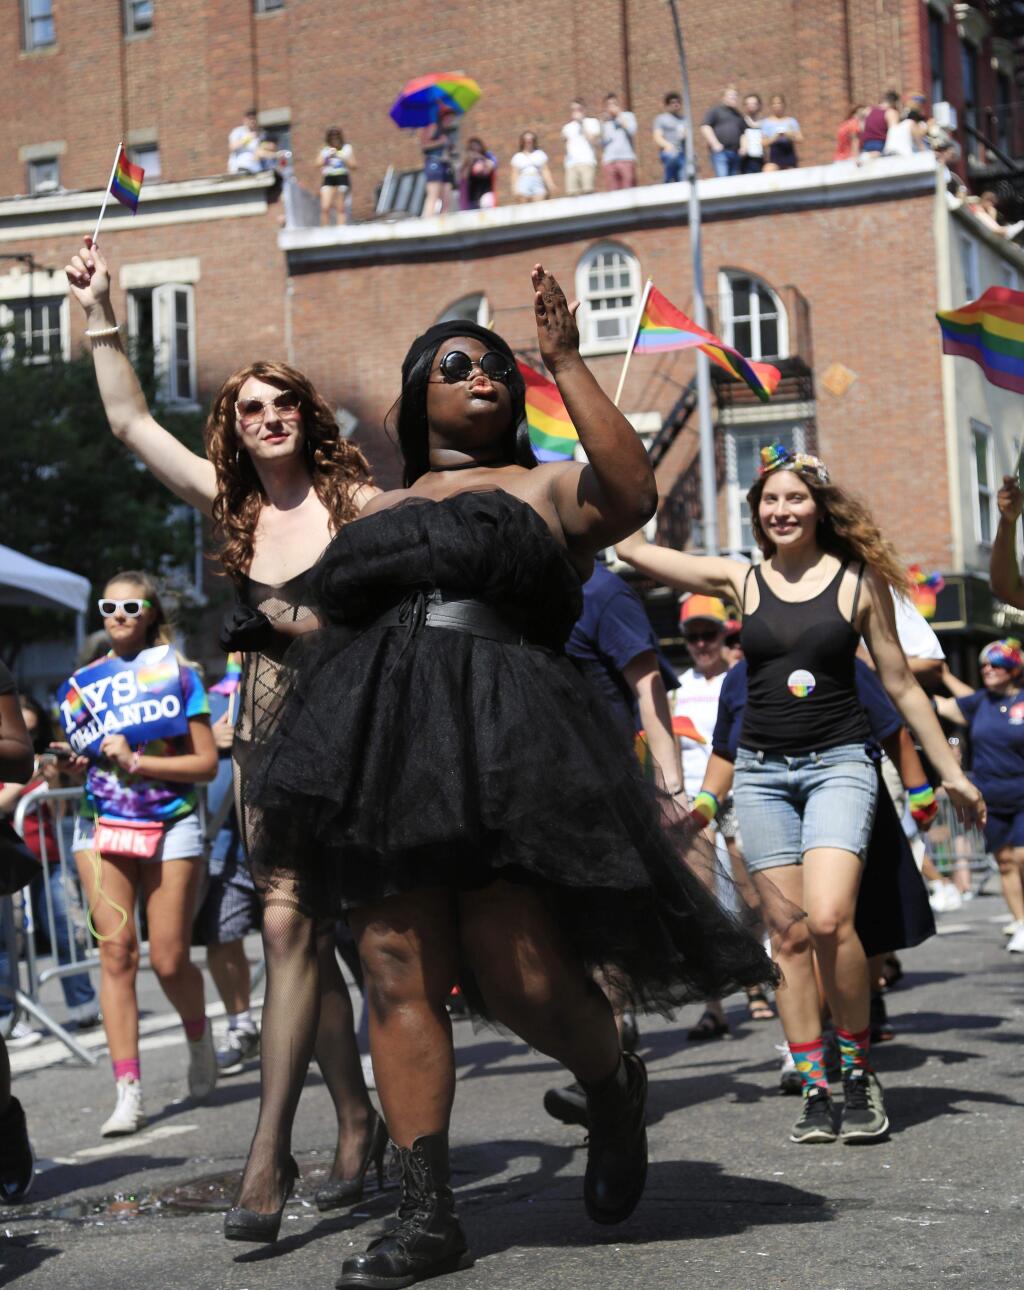 FILE - In this June 26, 2016 file photo, a woman blows kisses as she marches in New York City's annual pride parade. The annual pride parade takes place on Sunday, June 25, 2017, amid protests by black and brown LGBT people saying increasingly corporate pride celebrations prioritize the experiences of gay white men and ignore the issues continuing to face black and brown LGBT people. (AP Photo/Seth Wenig, File)